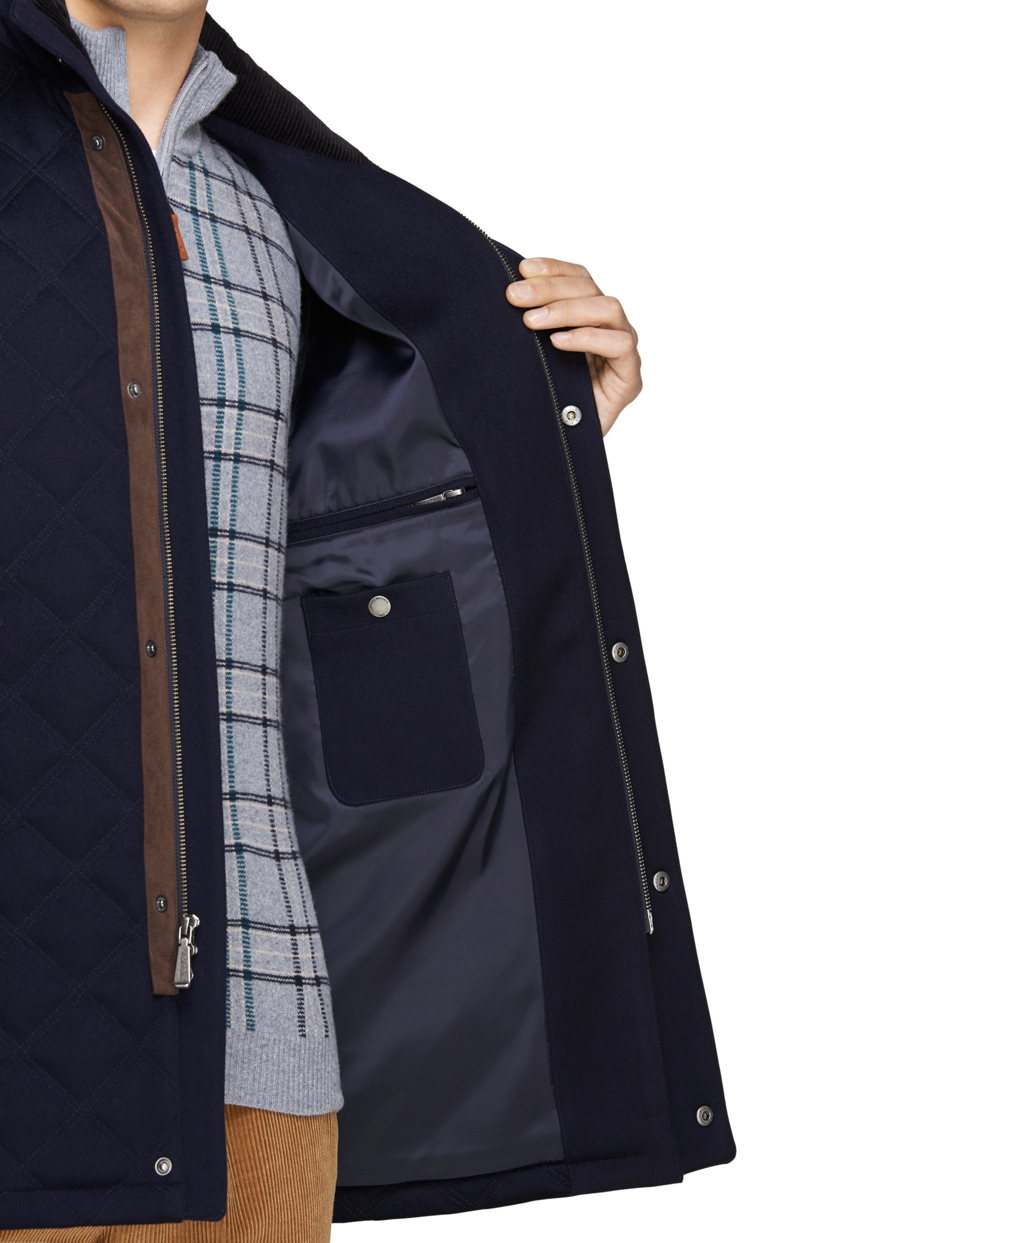 Lyst - Brooks Brothers Quilted Wool Jacket in Blue for Men